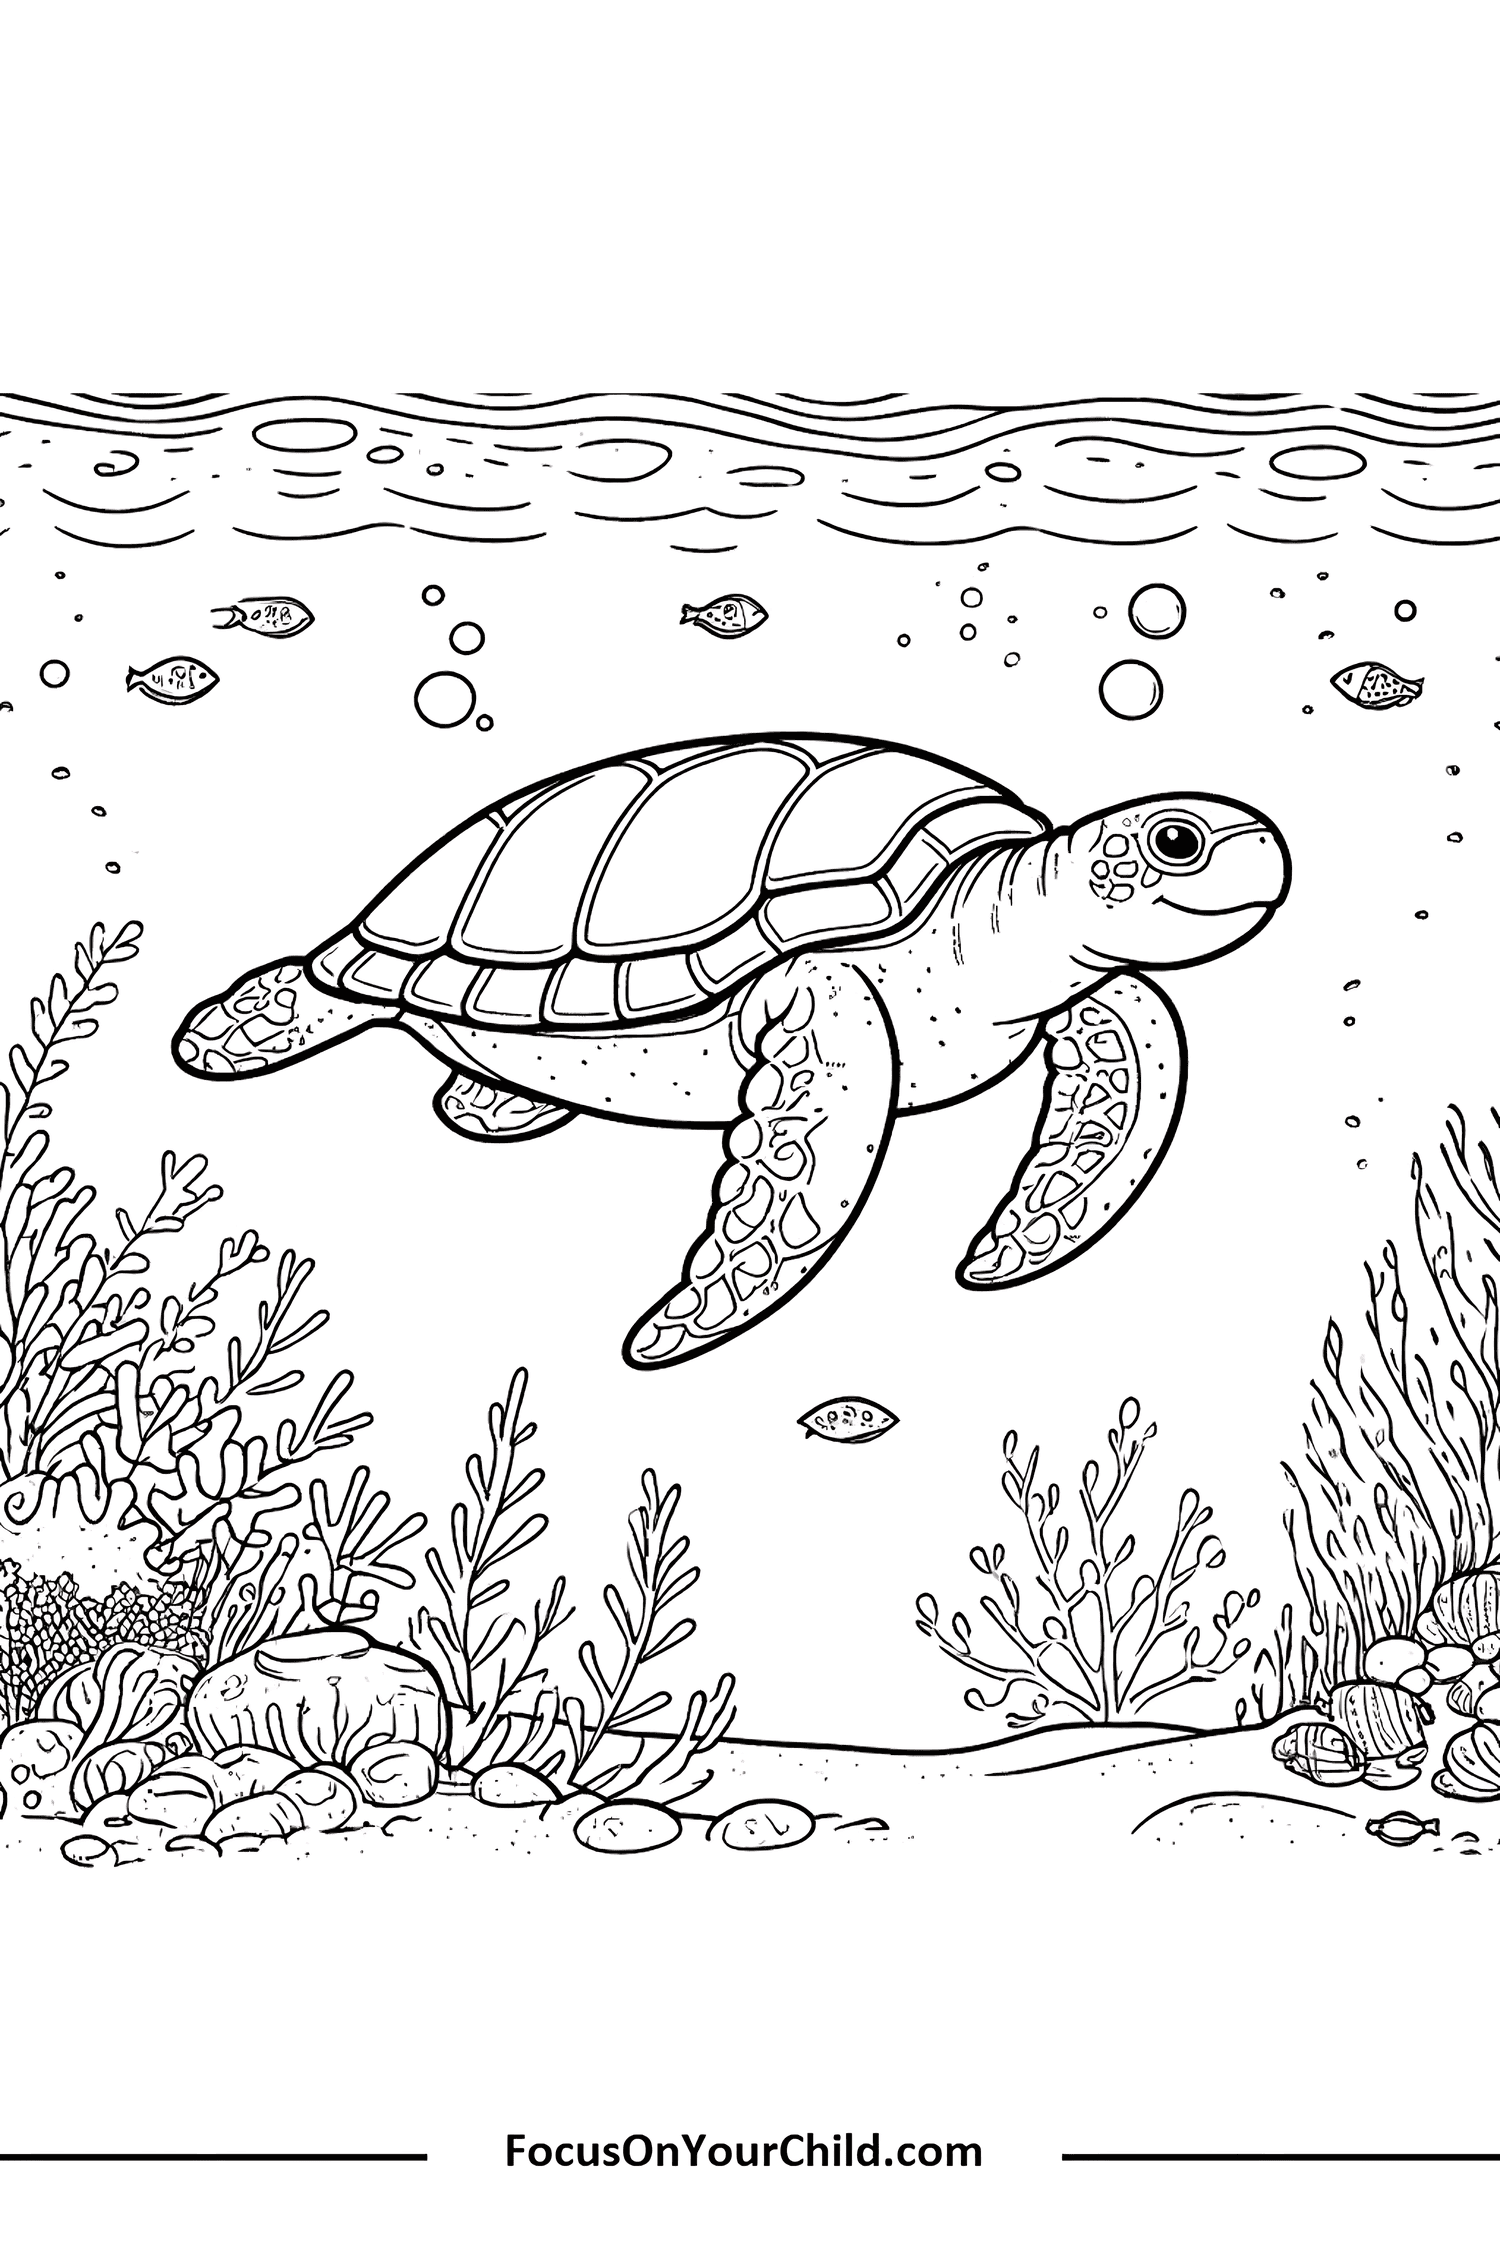 Detailed black-and-white line drawing of sea turtle swimming in vibrant underwater scene.